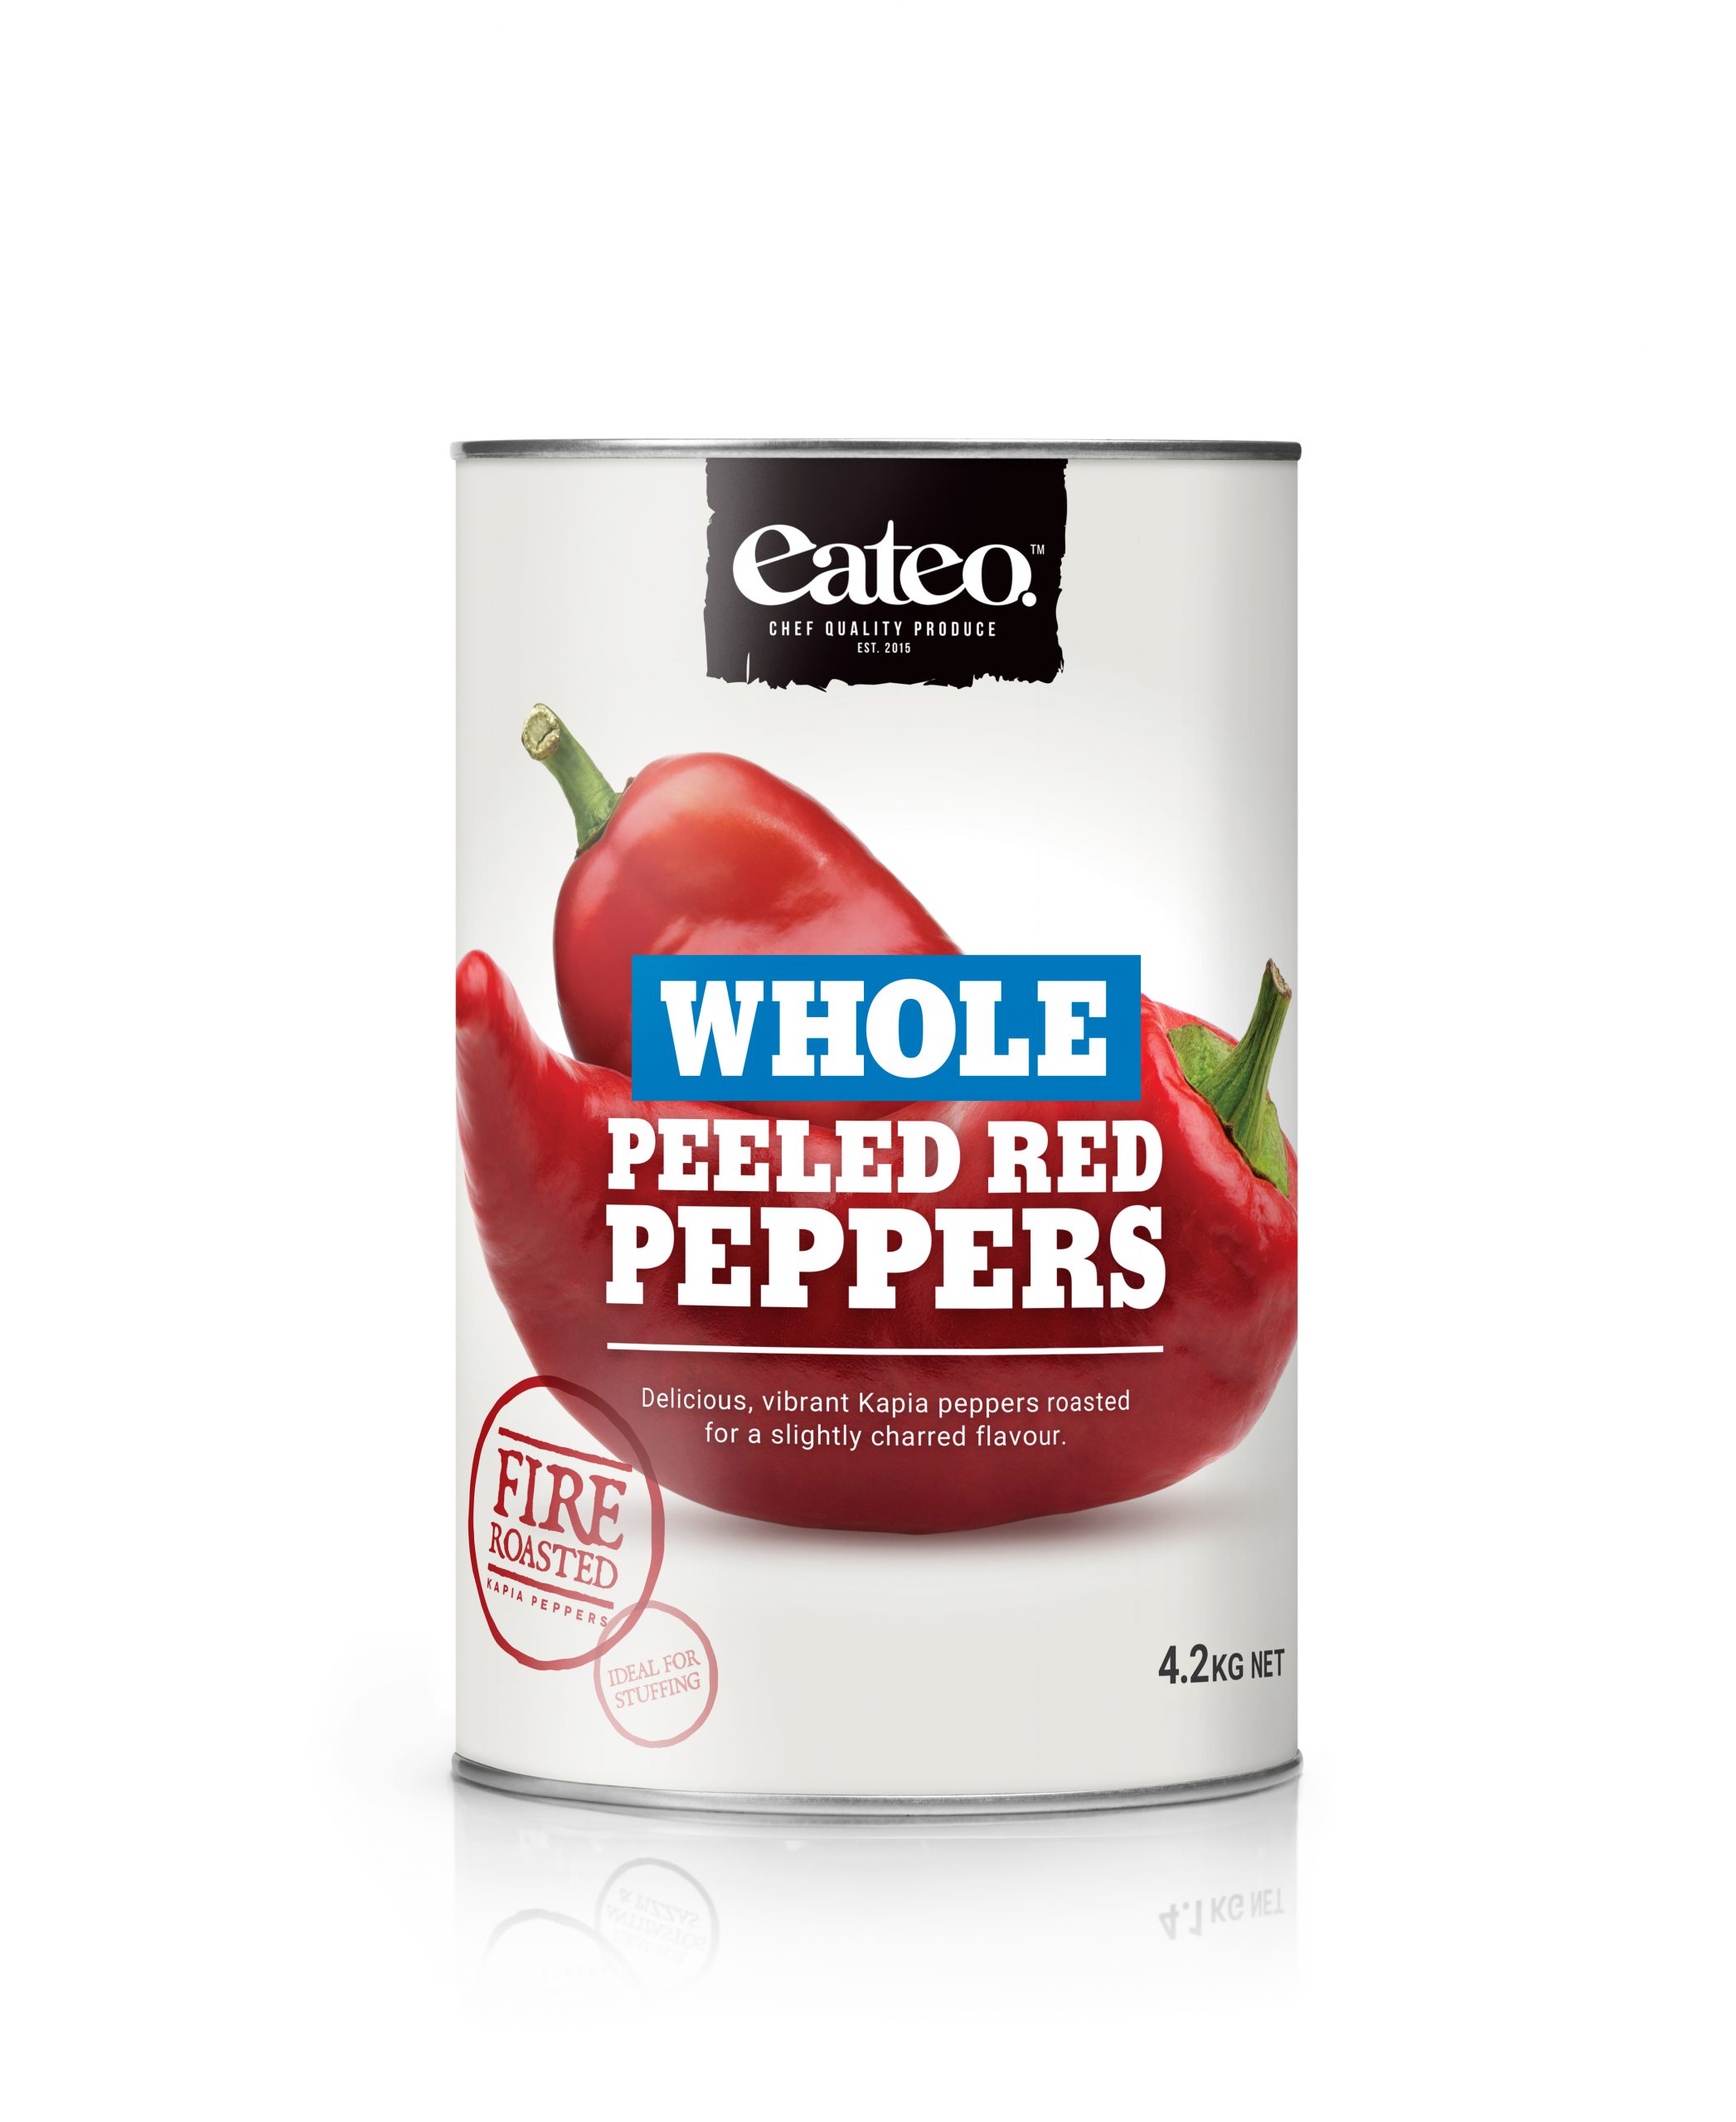 Whole Peeled Red Peppers